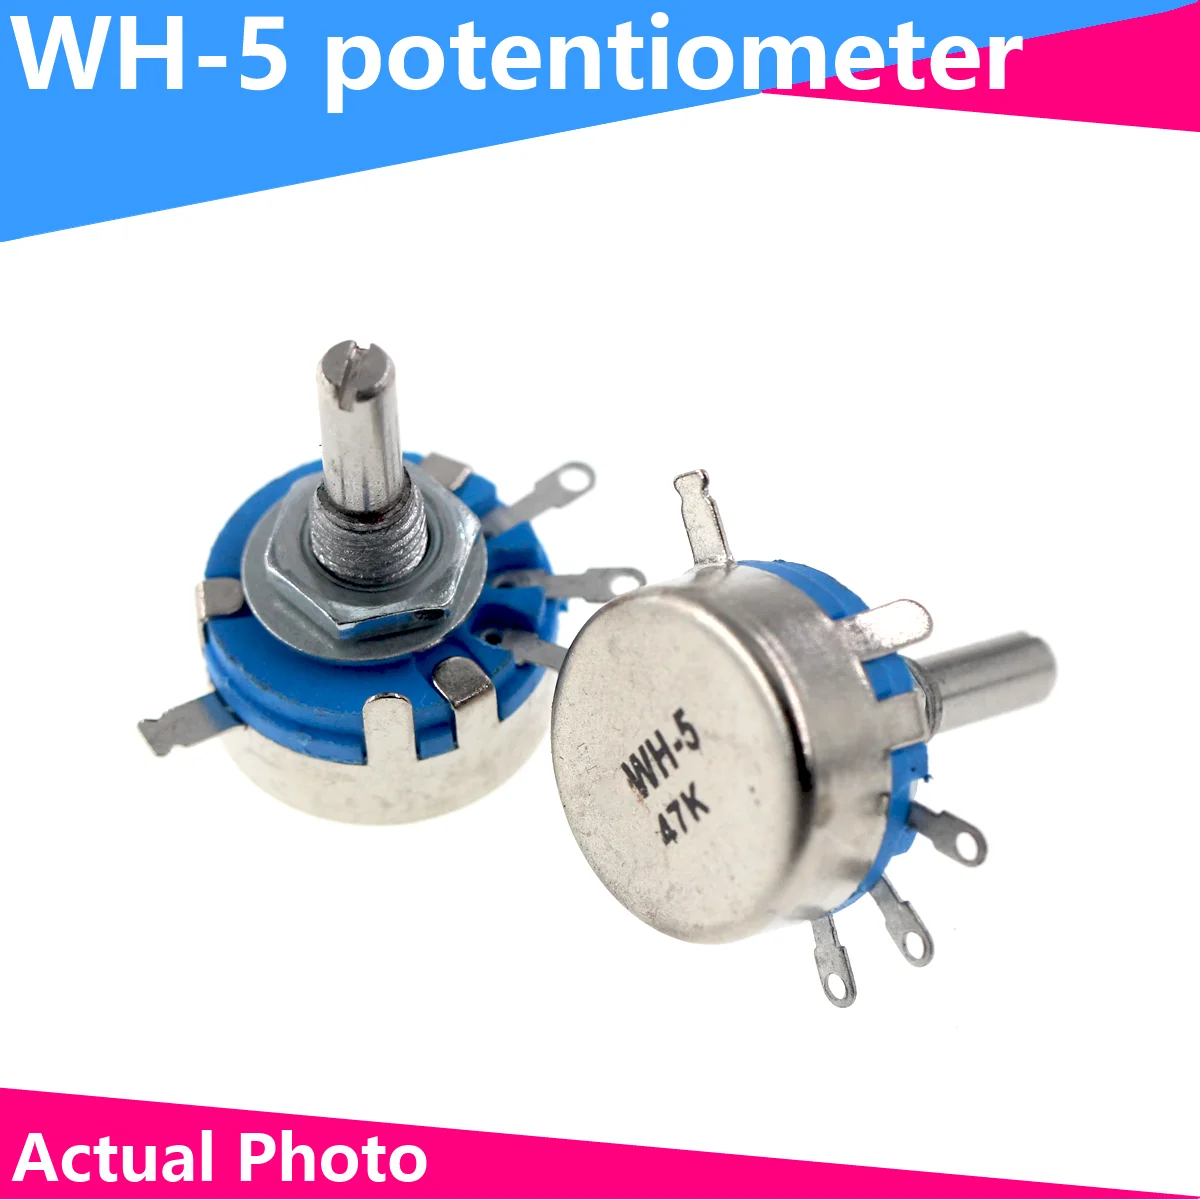 2PCS WH5-1A 470R 1K 10K 47K 4K7 100K 470K 220K 1K5 22K 1M ohm 3-Terminals Round Shaft Rotary Taper Carbon Potentiometer WH5 2pcs wh5 1a carbon potentiometer 470r 1k 1k5 2 2k 4 7k 10k 22k 47k 100k 220k 470k 1m ohm 3 terminals round shaft rotary taper wh